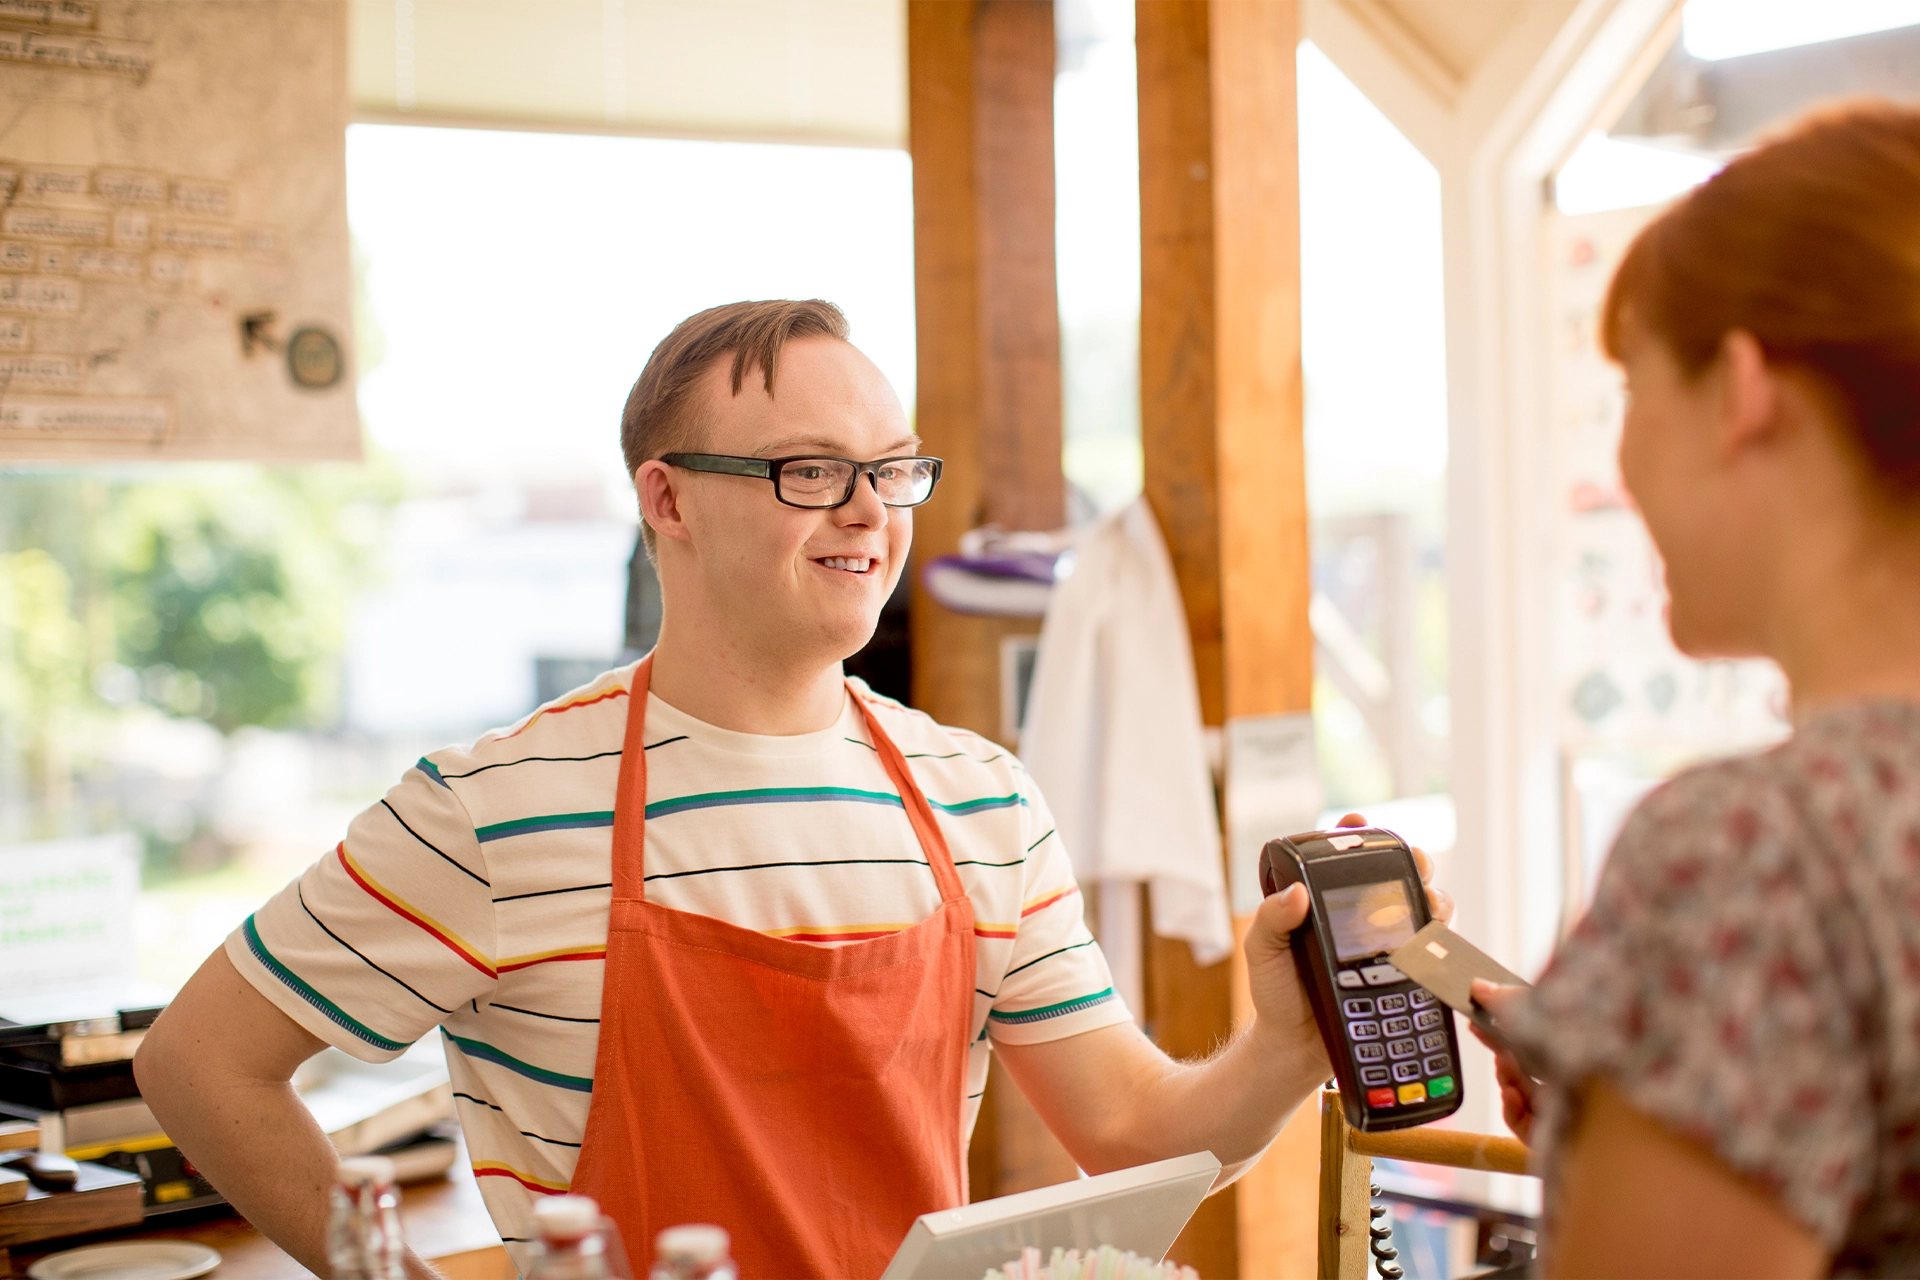 Man with Down's Syndrome serving a happy customer in a cafe